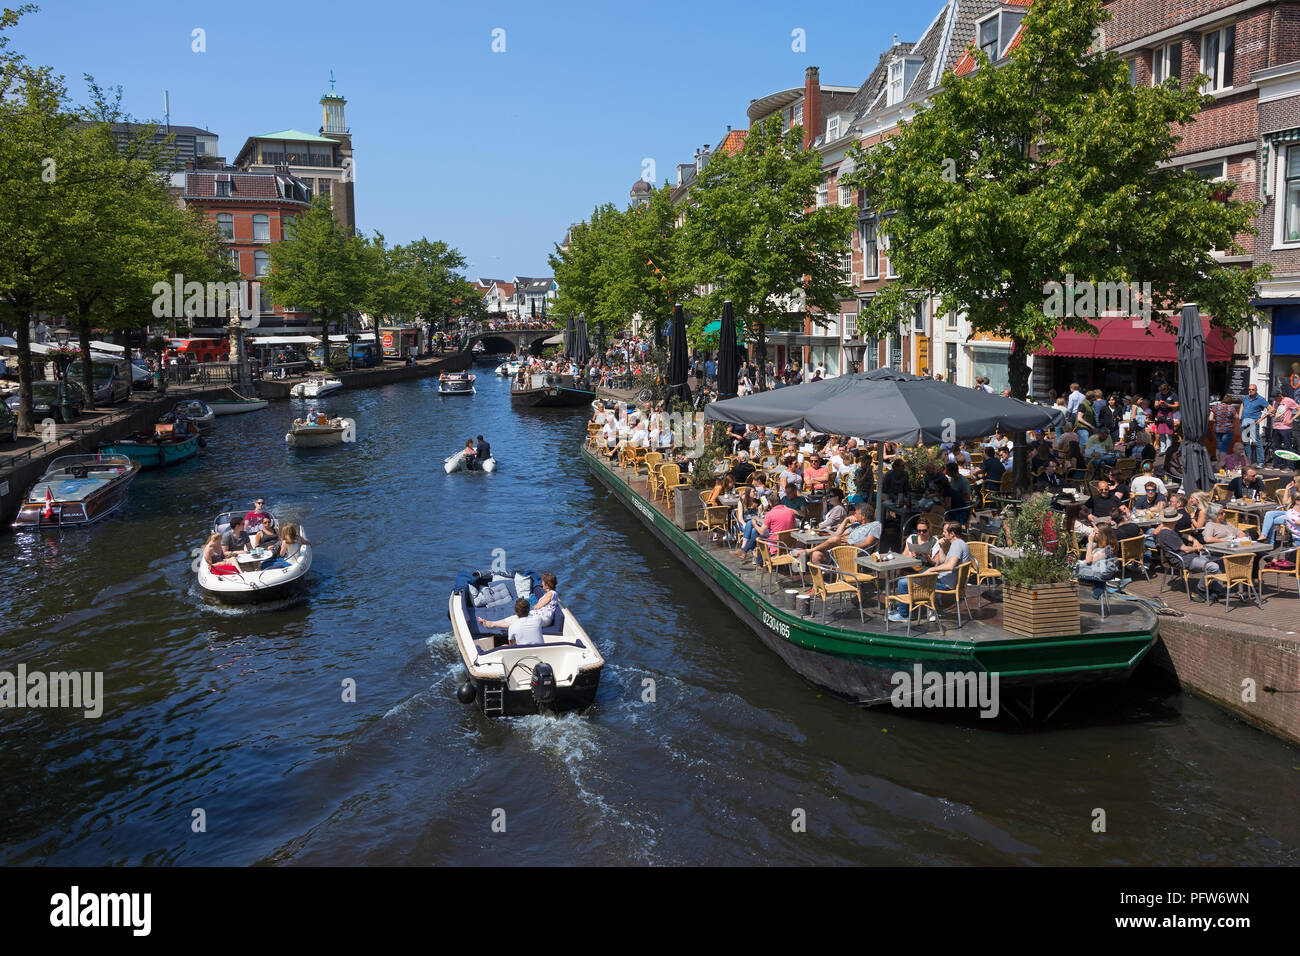 Leiden, Netherlands - May 20, 2018: Terraces and boats near the canal called Nieuwe Rijn, in summer Stock Photo